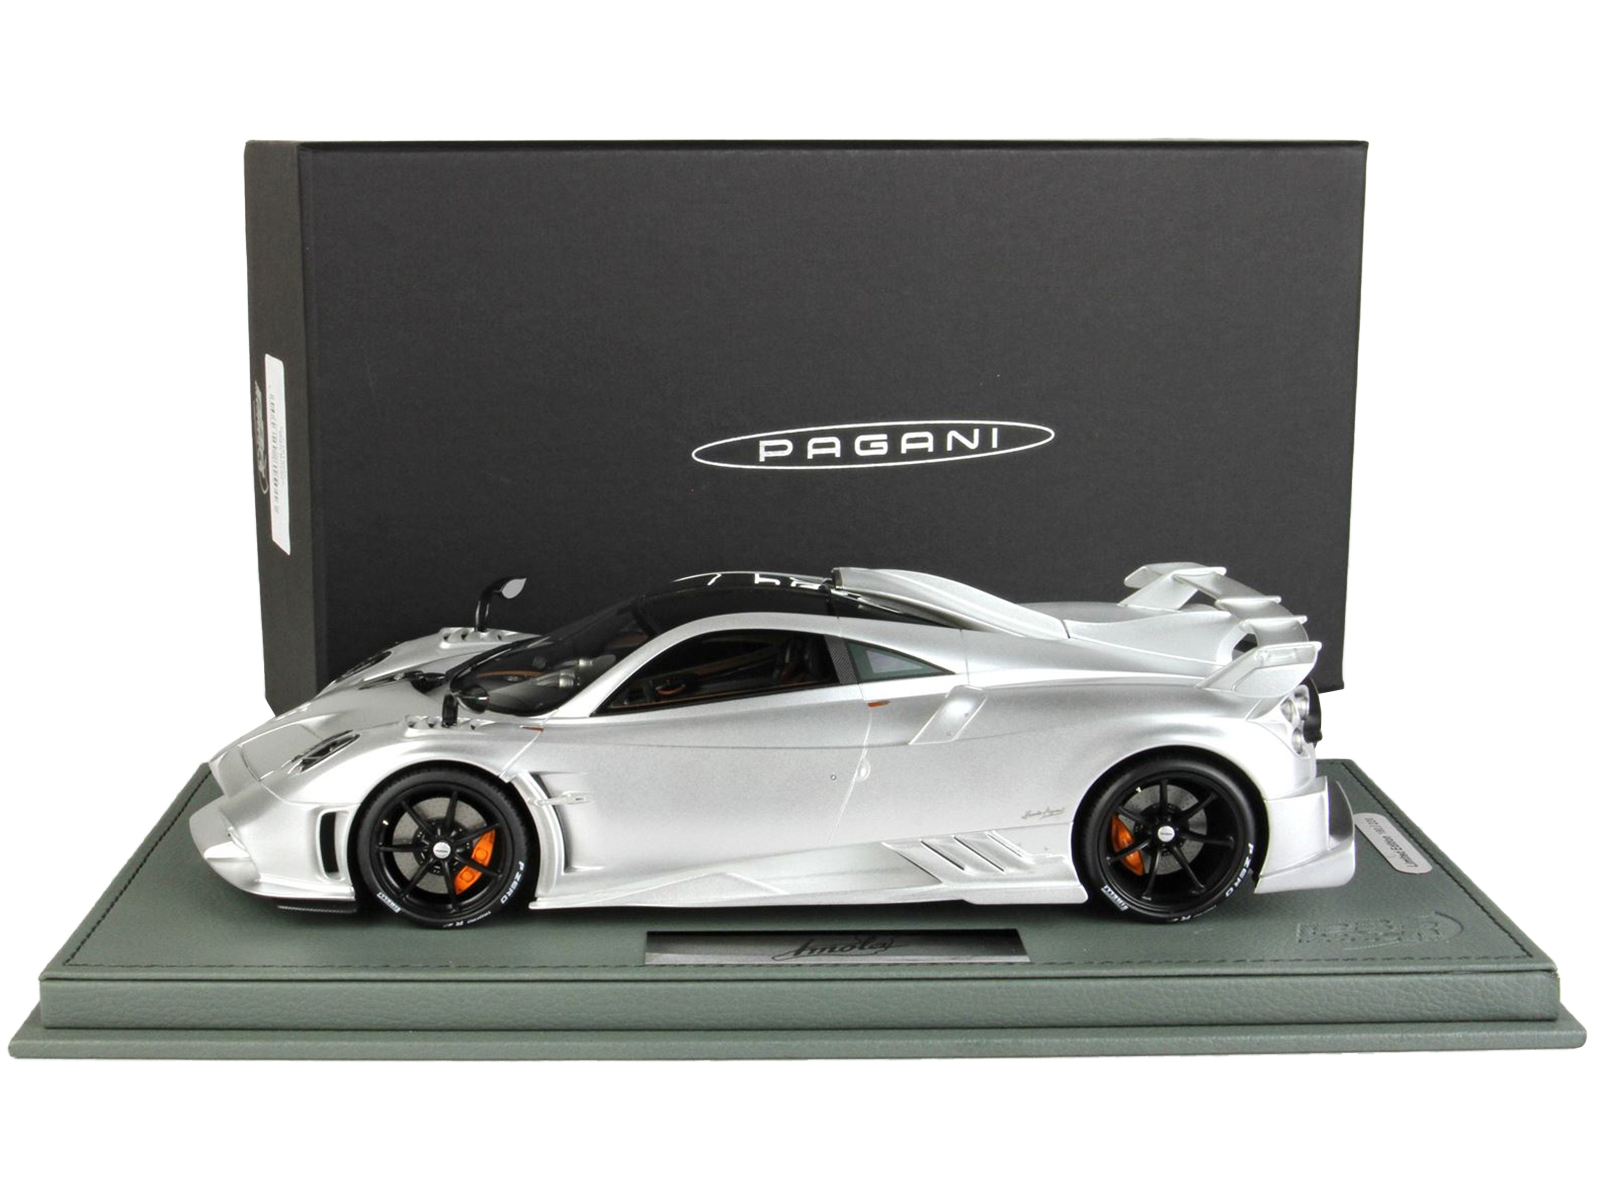 Image of 2020 Pagani Imola Matt Silver with Black Top with DISPLAY CASE Limited Edition to 220 pieces Worldwide model car 1/18 Model Car by BBR